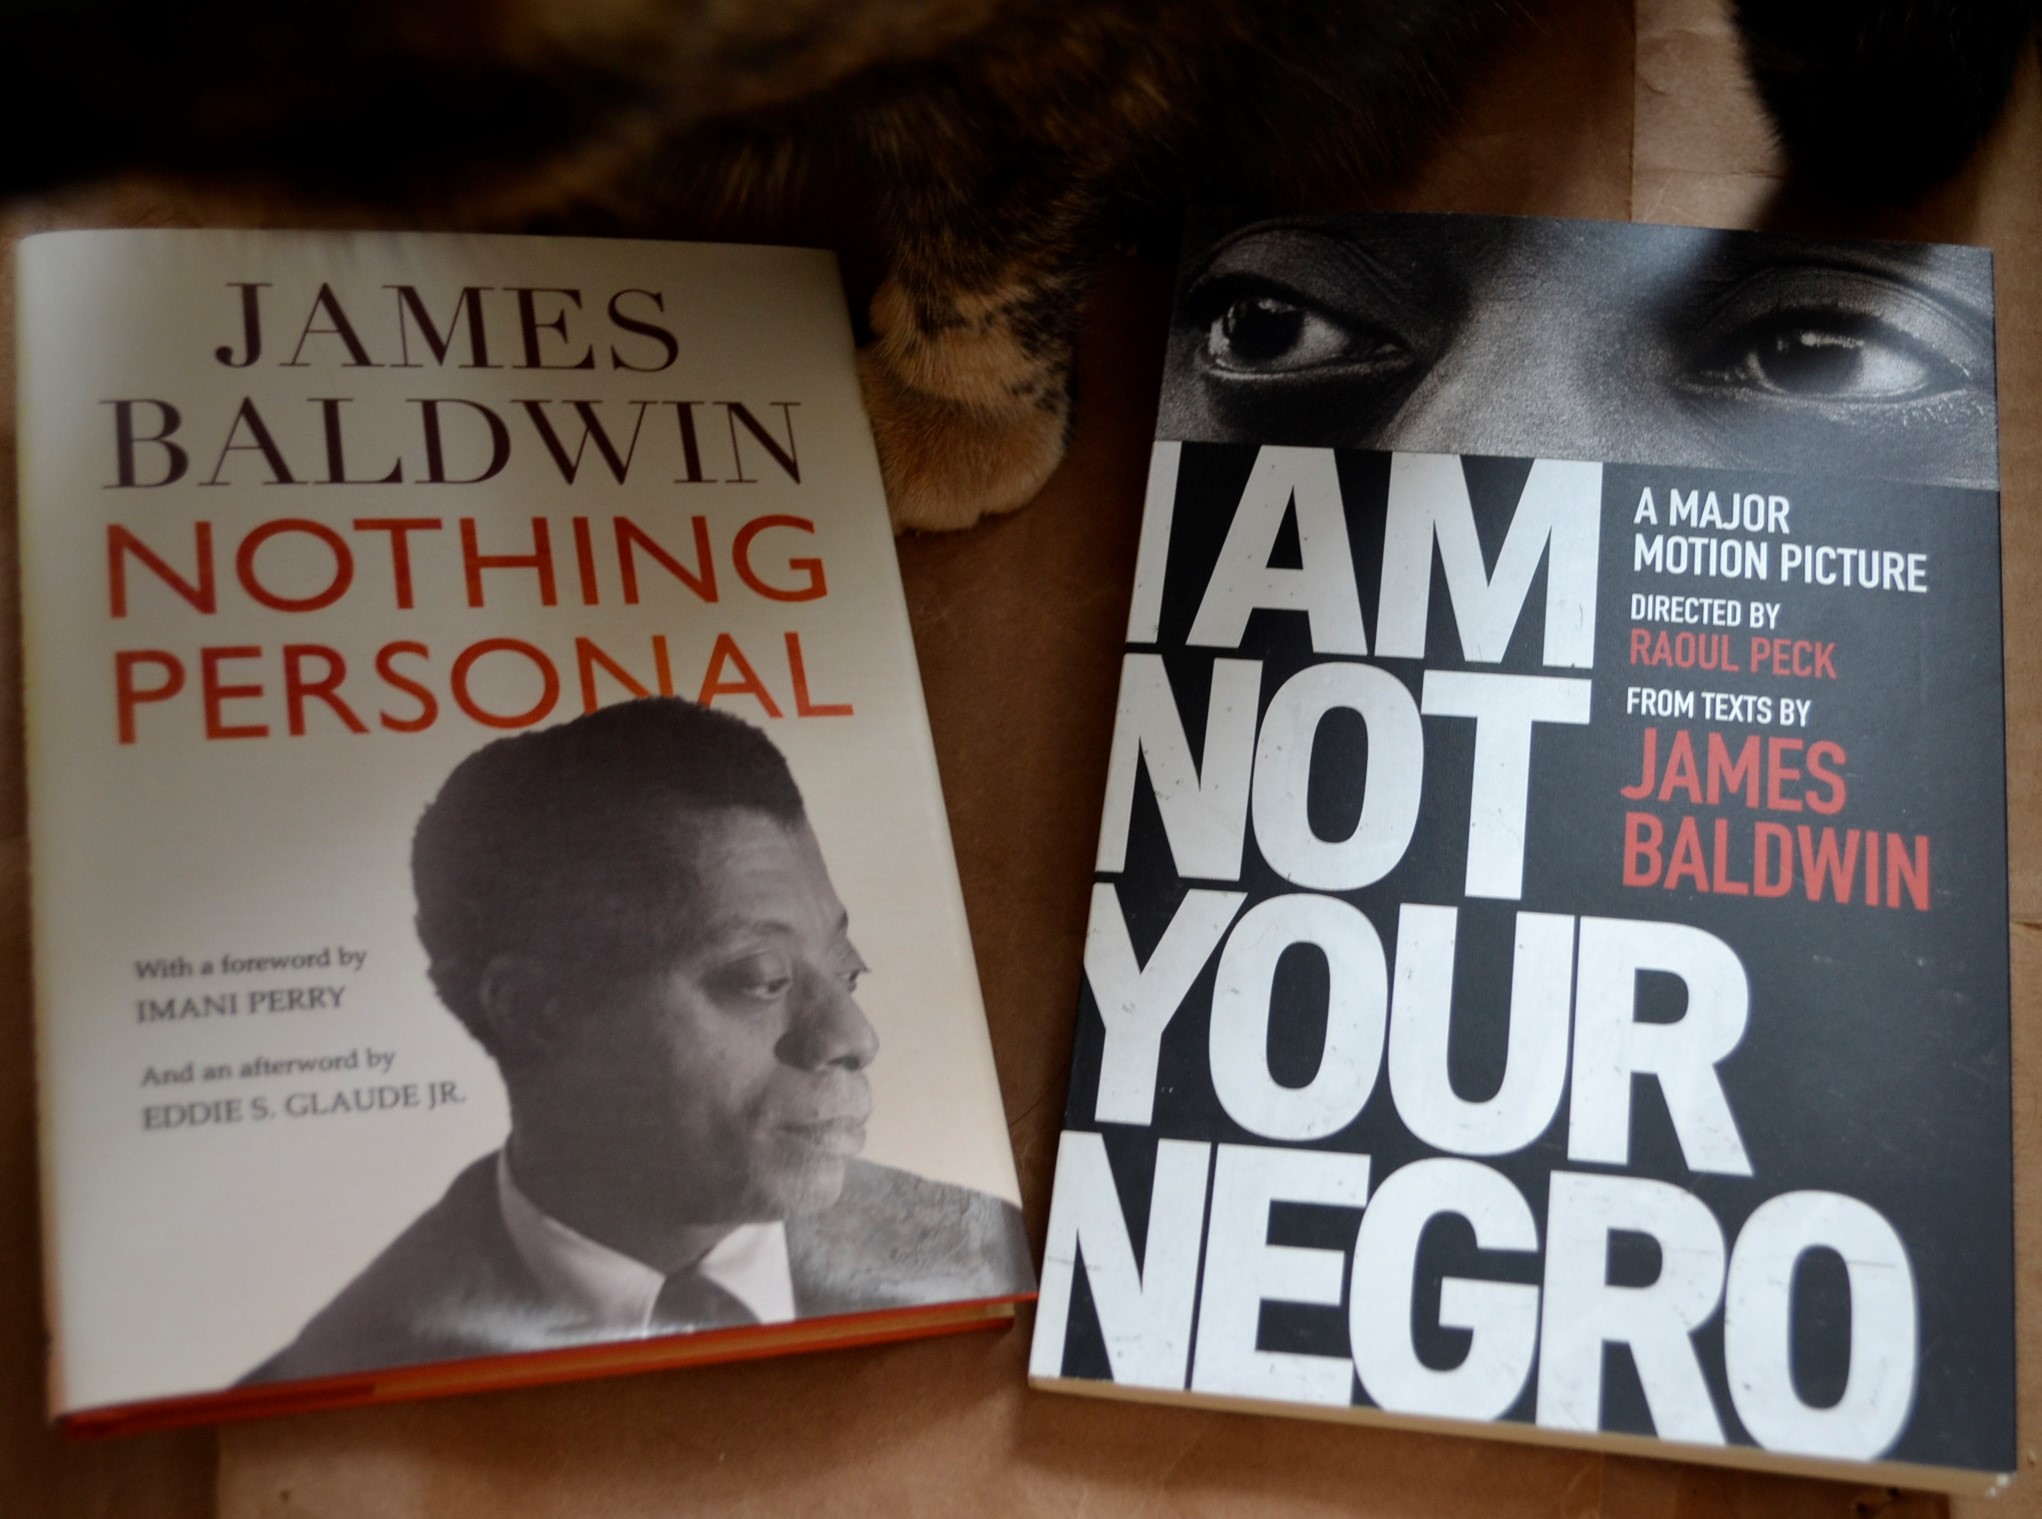 The covers of two of James Baldwin's books, I Am Not Your Negro and Nothing Personal. Both feature a picture of Baldwin.